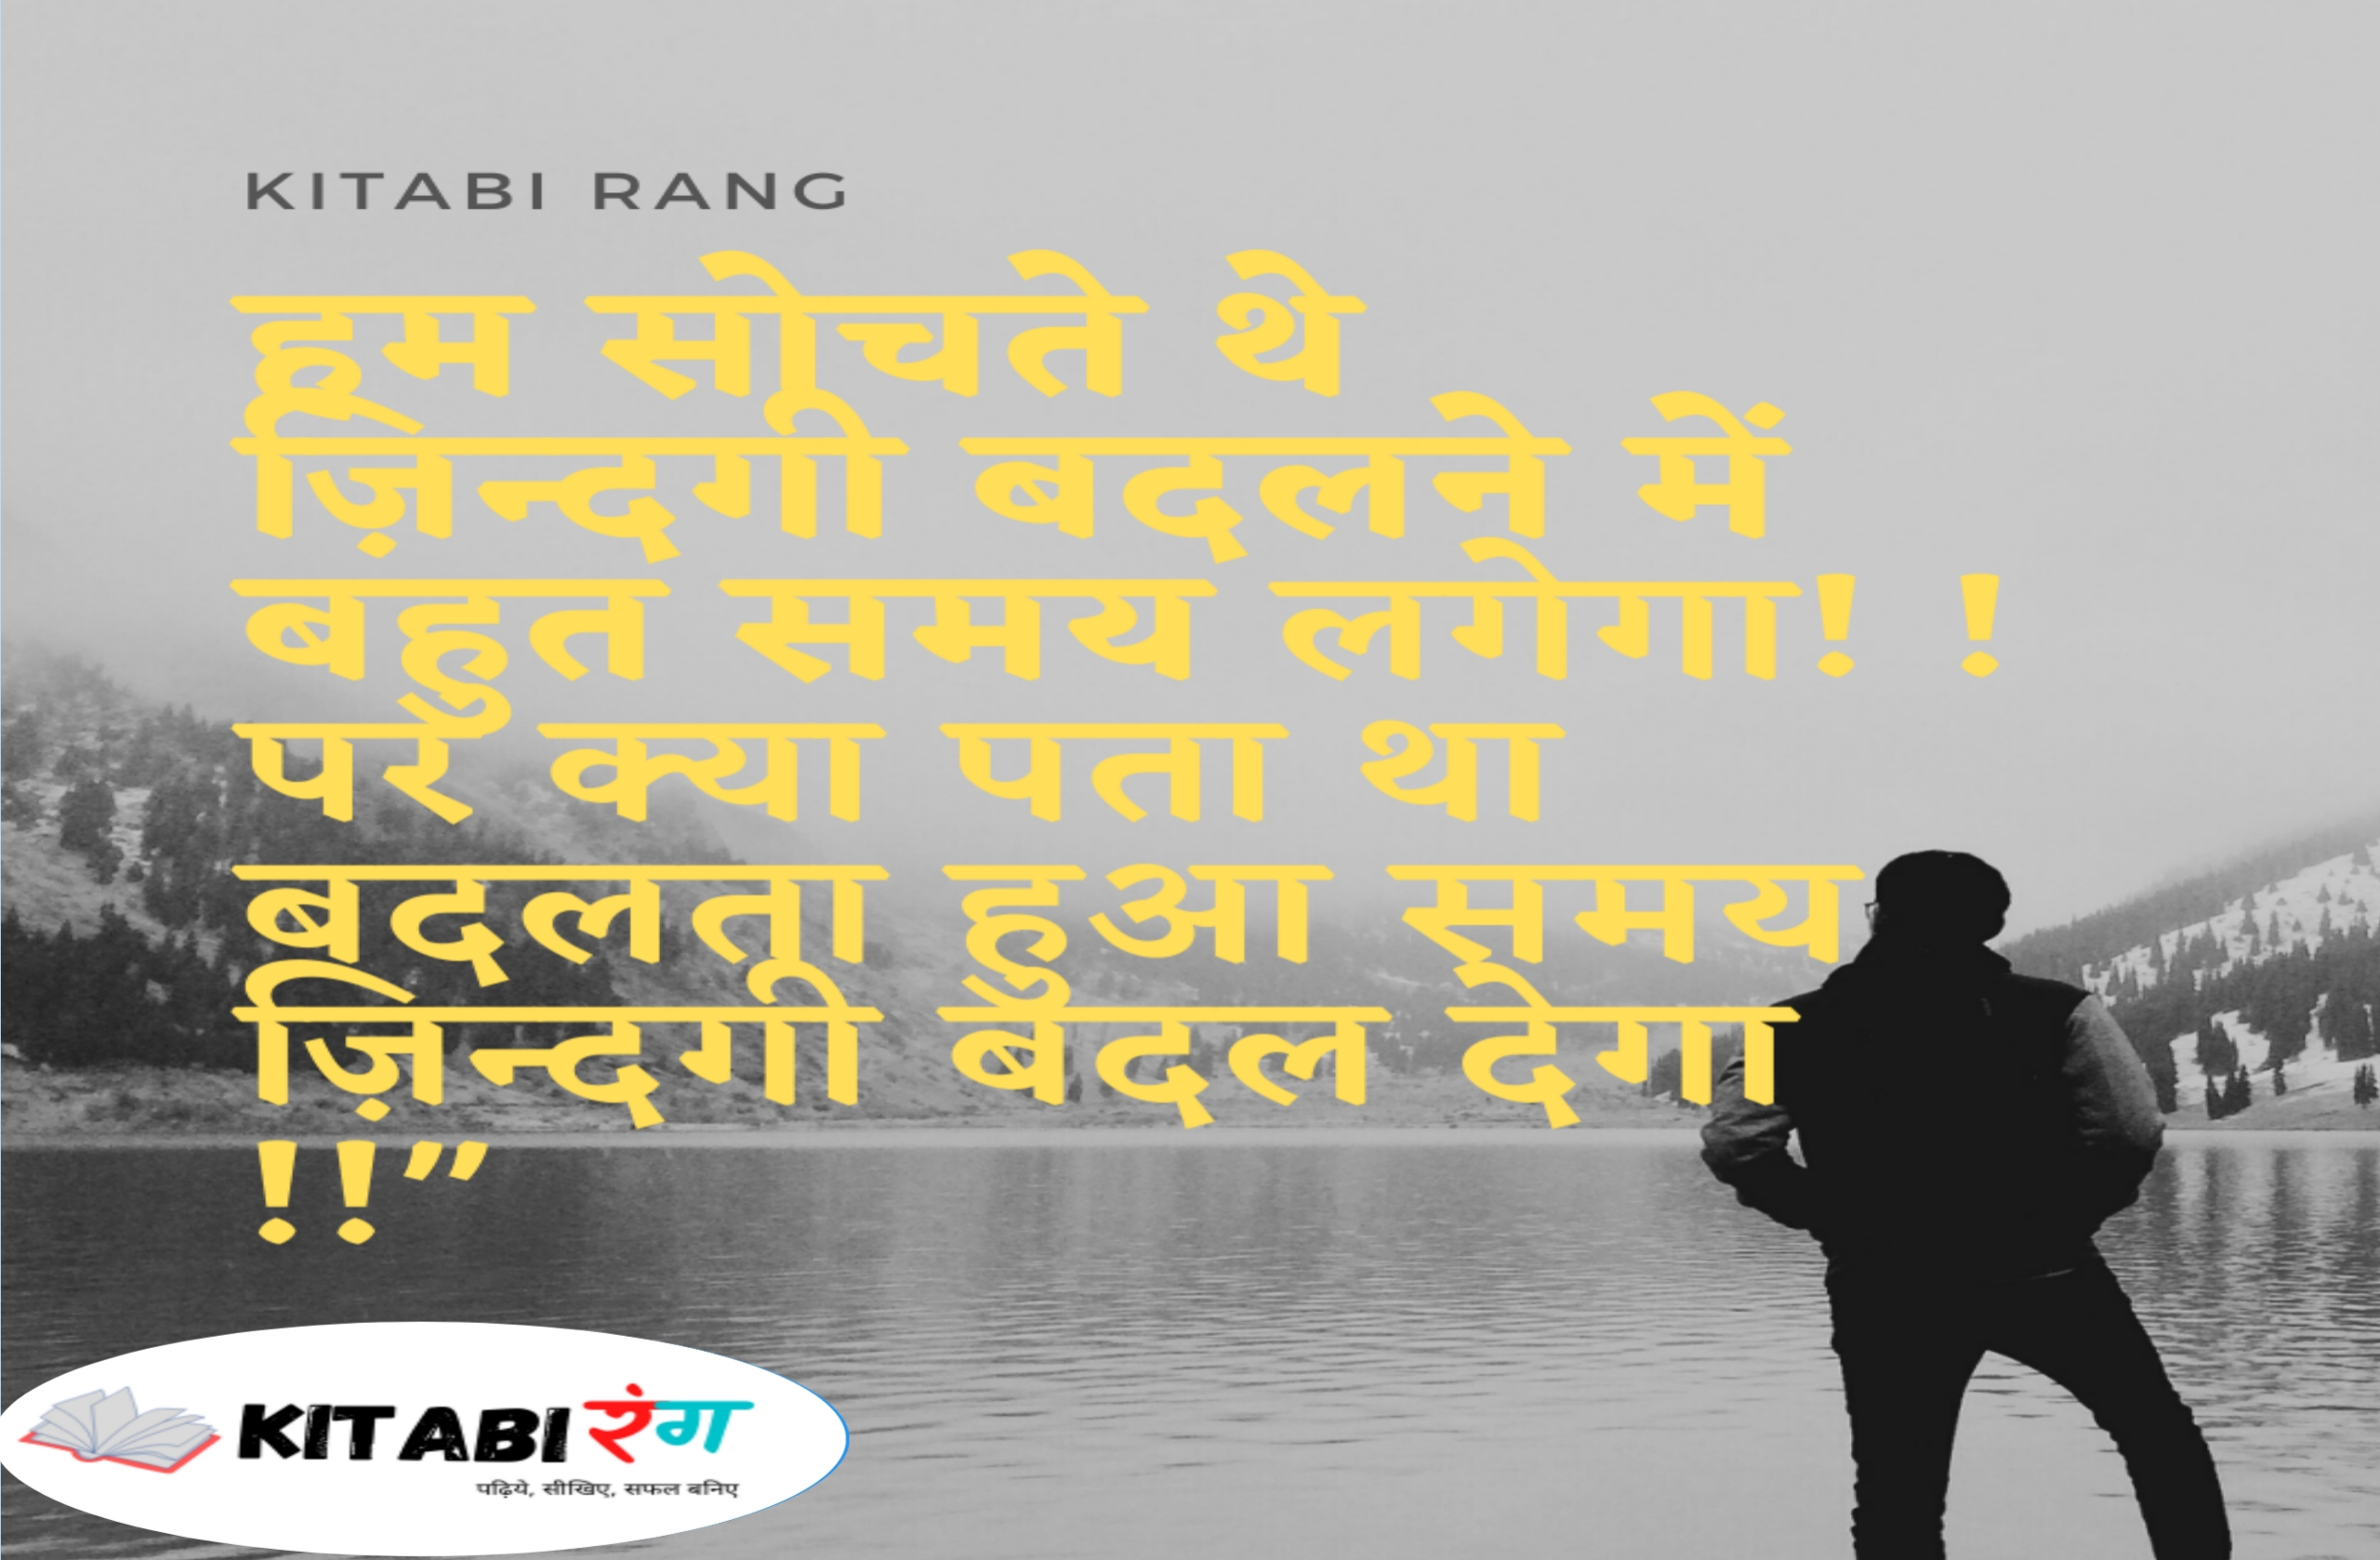 Top 10 Life Quotes in Hindi | Life Thoughts in Hindi 2021